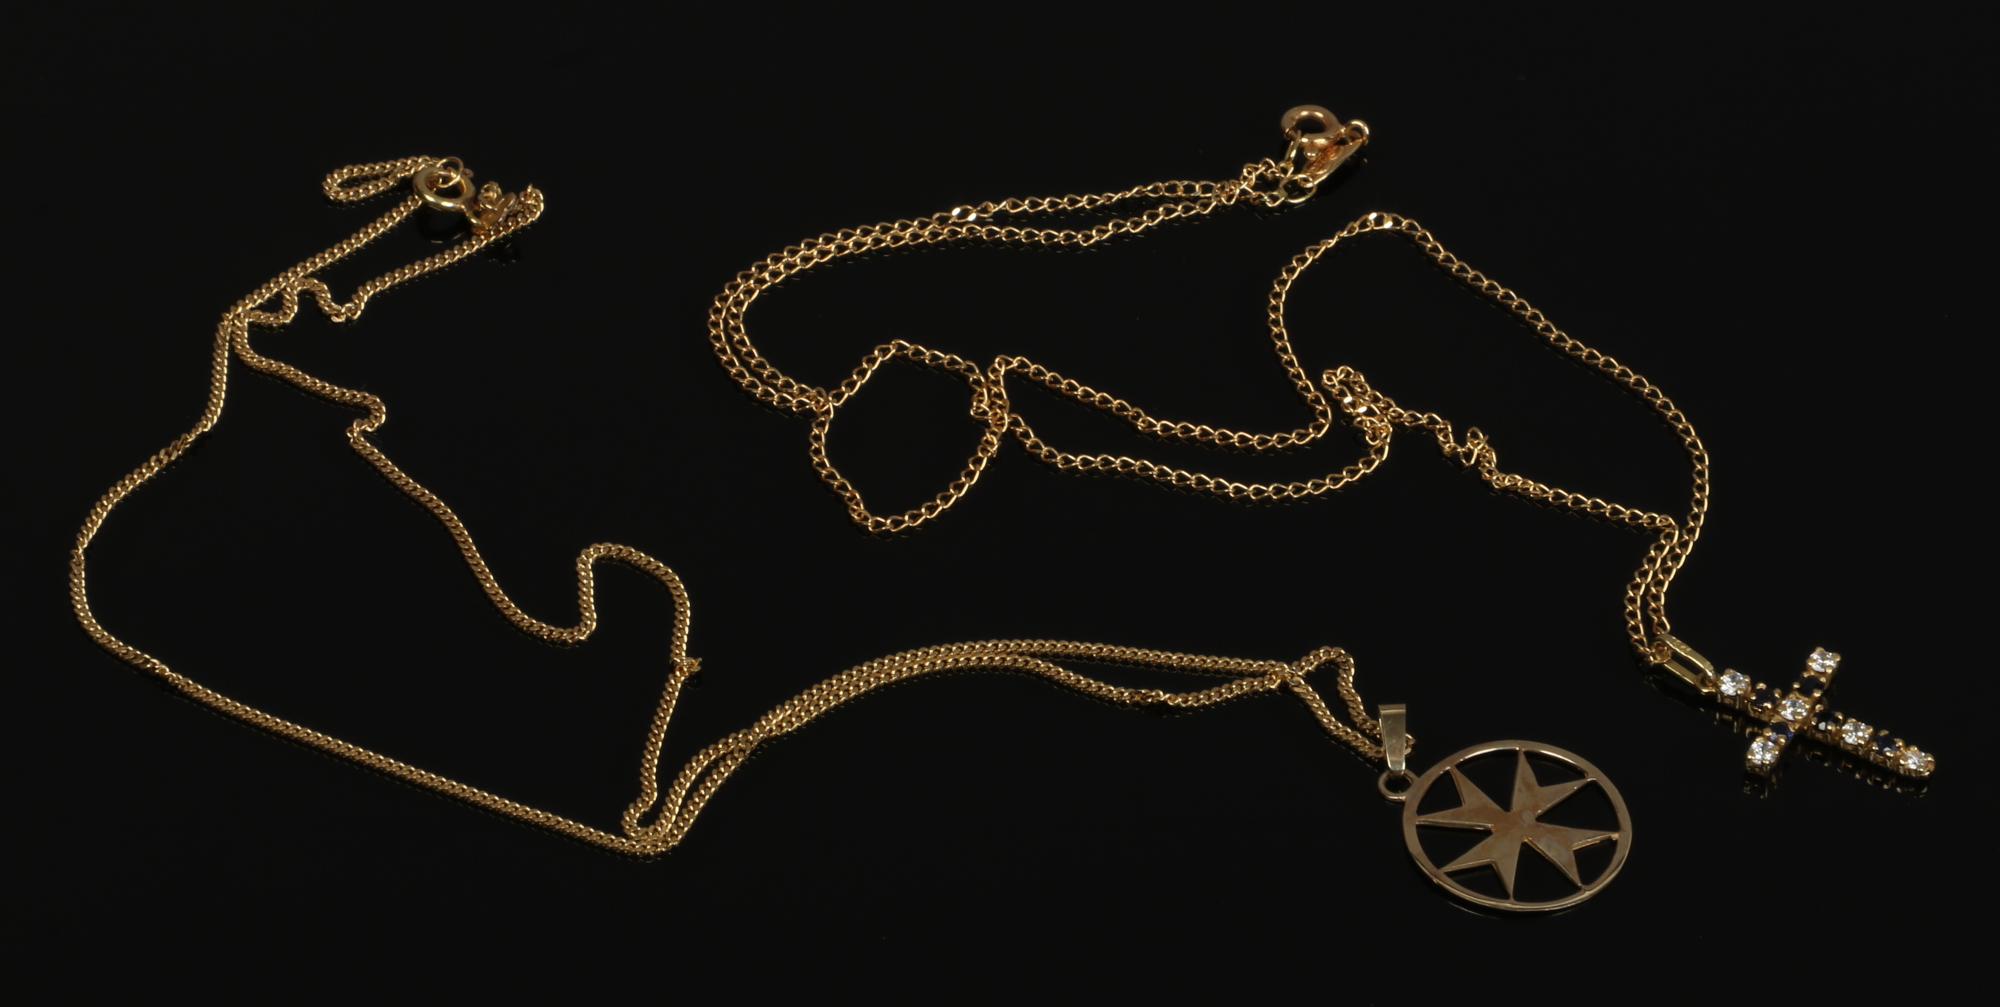 Two 18ct gold chains. One with an 18ct gold crucifix pendant, the other a 9ct gold Maltese cross